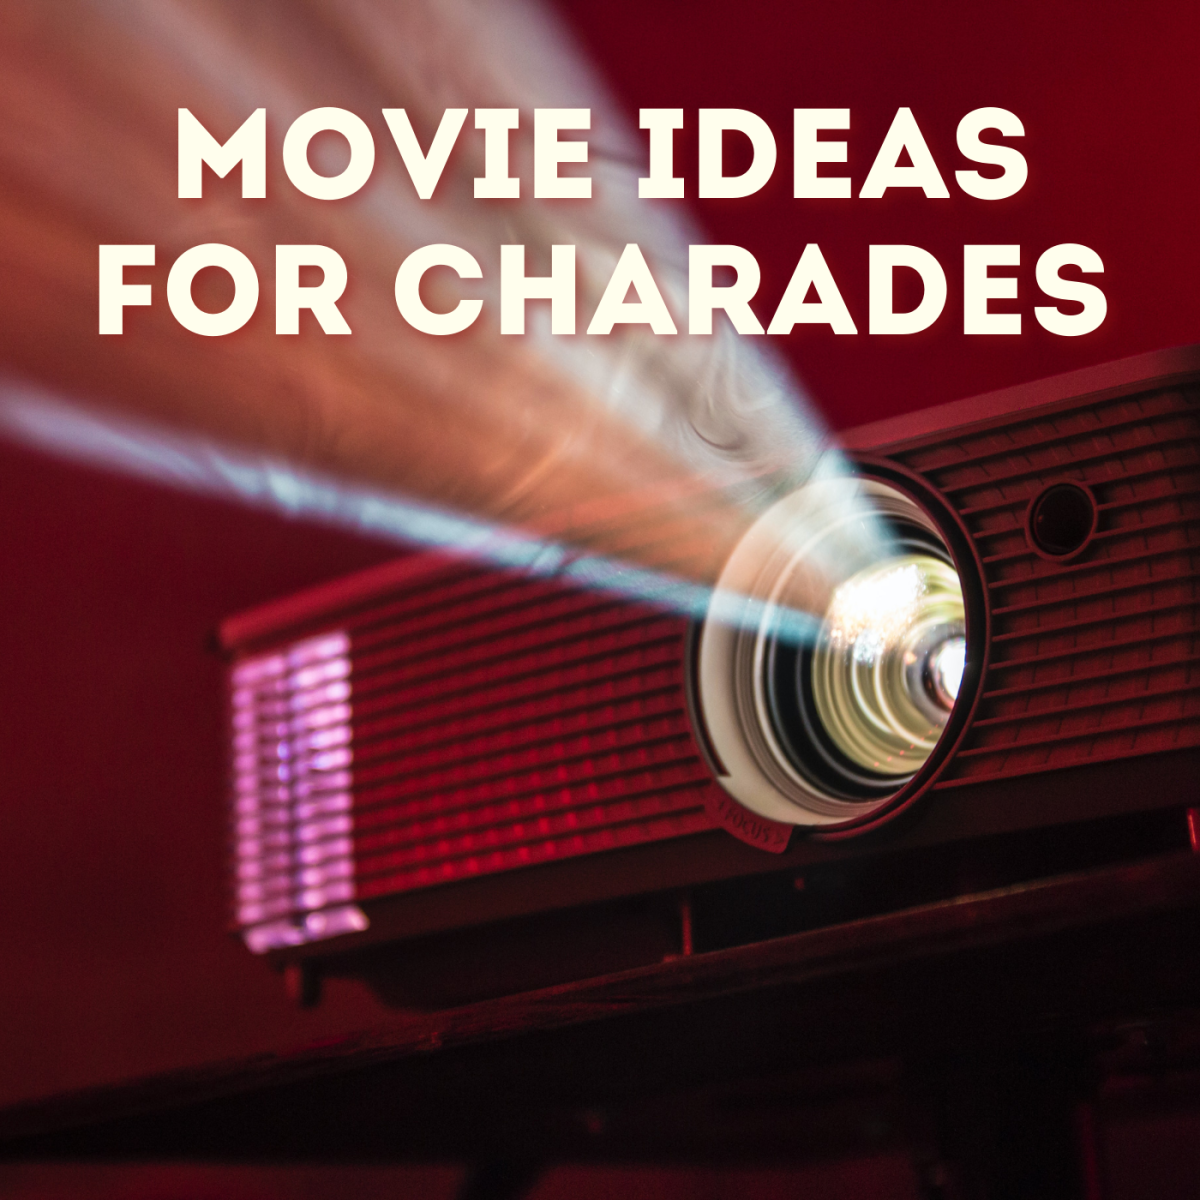 Need some good film titles for your next charades night? Get more than 150 movie ideas here!